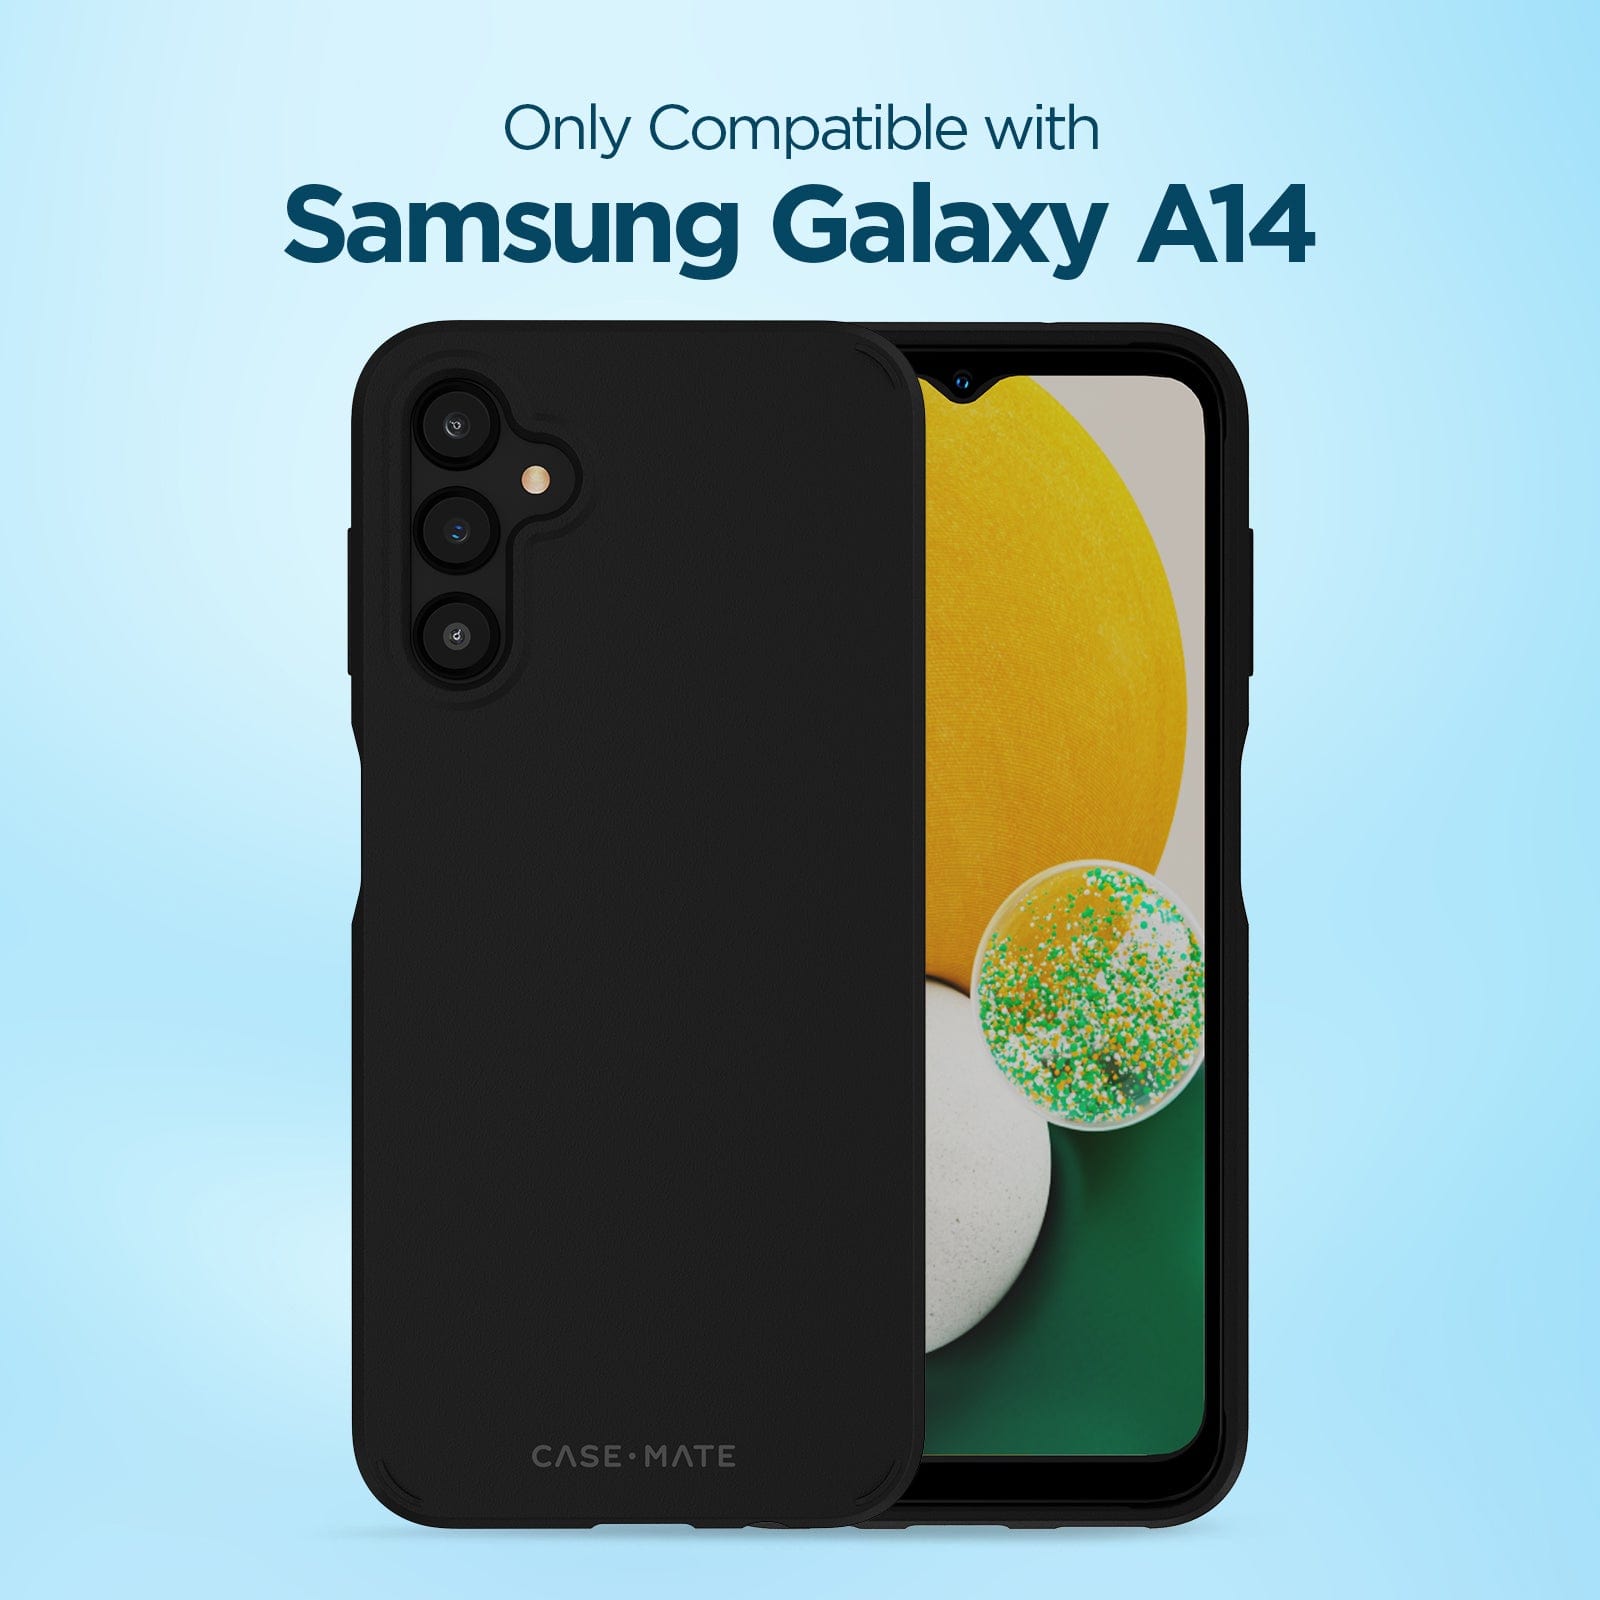 ONLY COMPATIBLE WITH SAMSUNG GALAXY A14